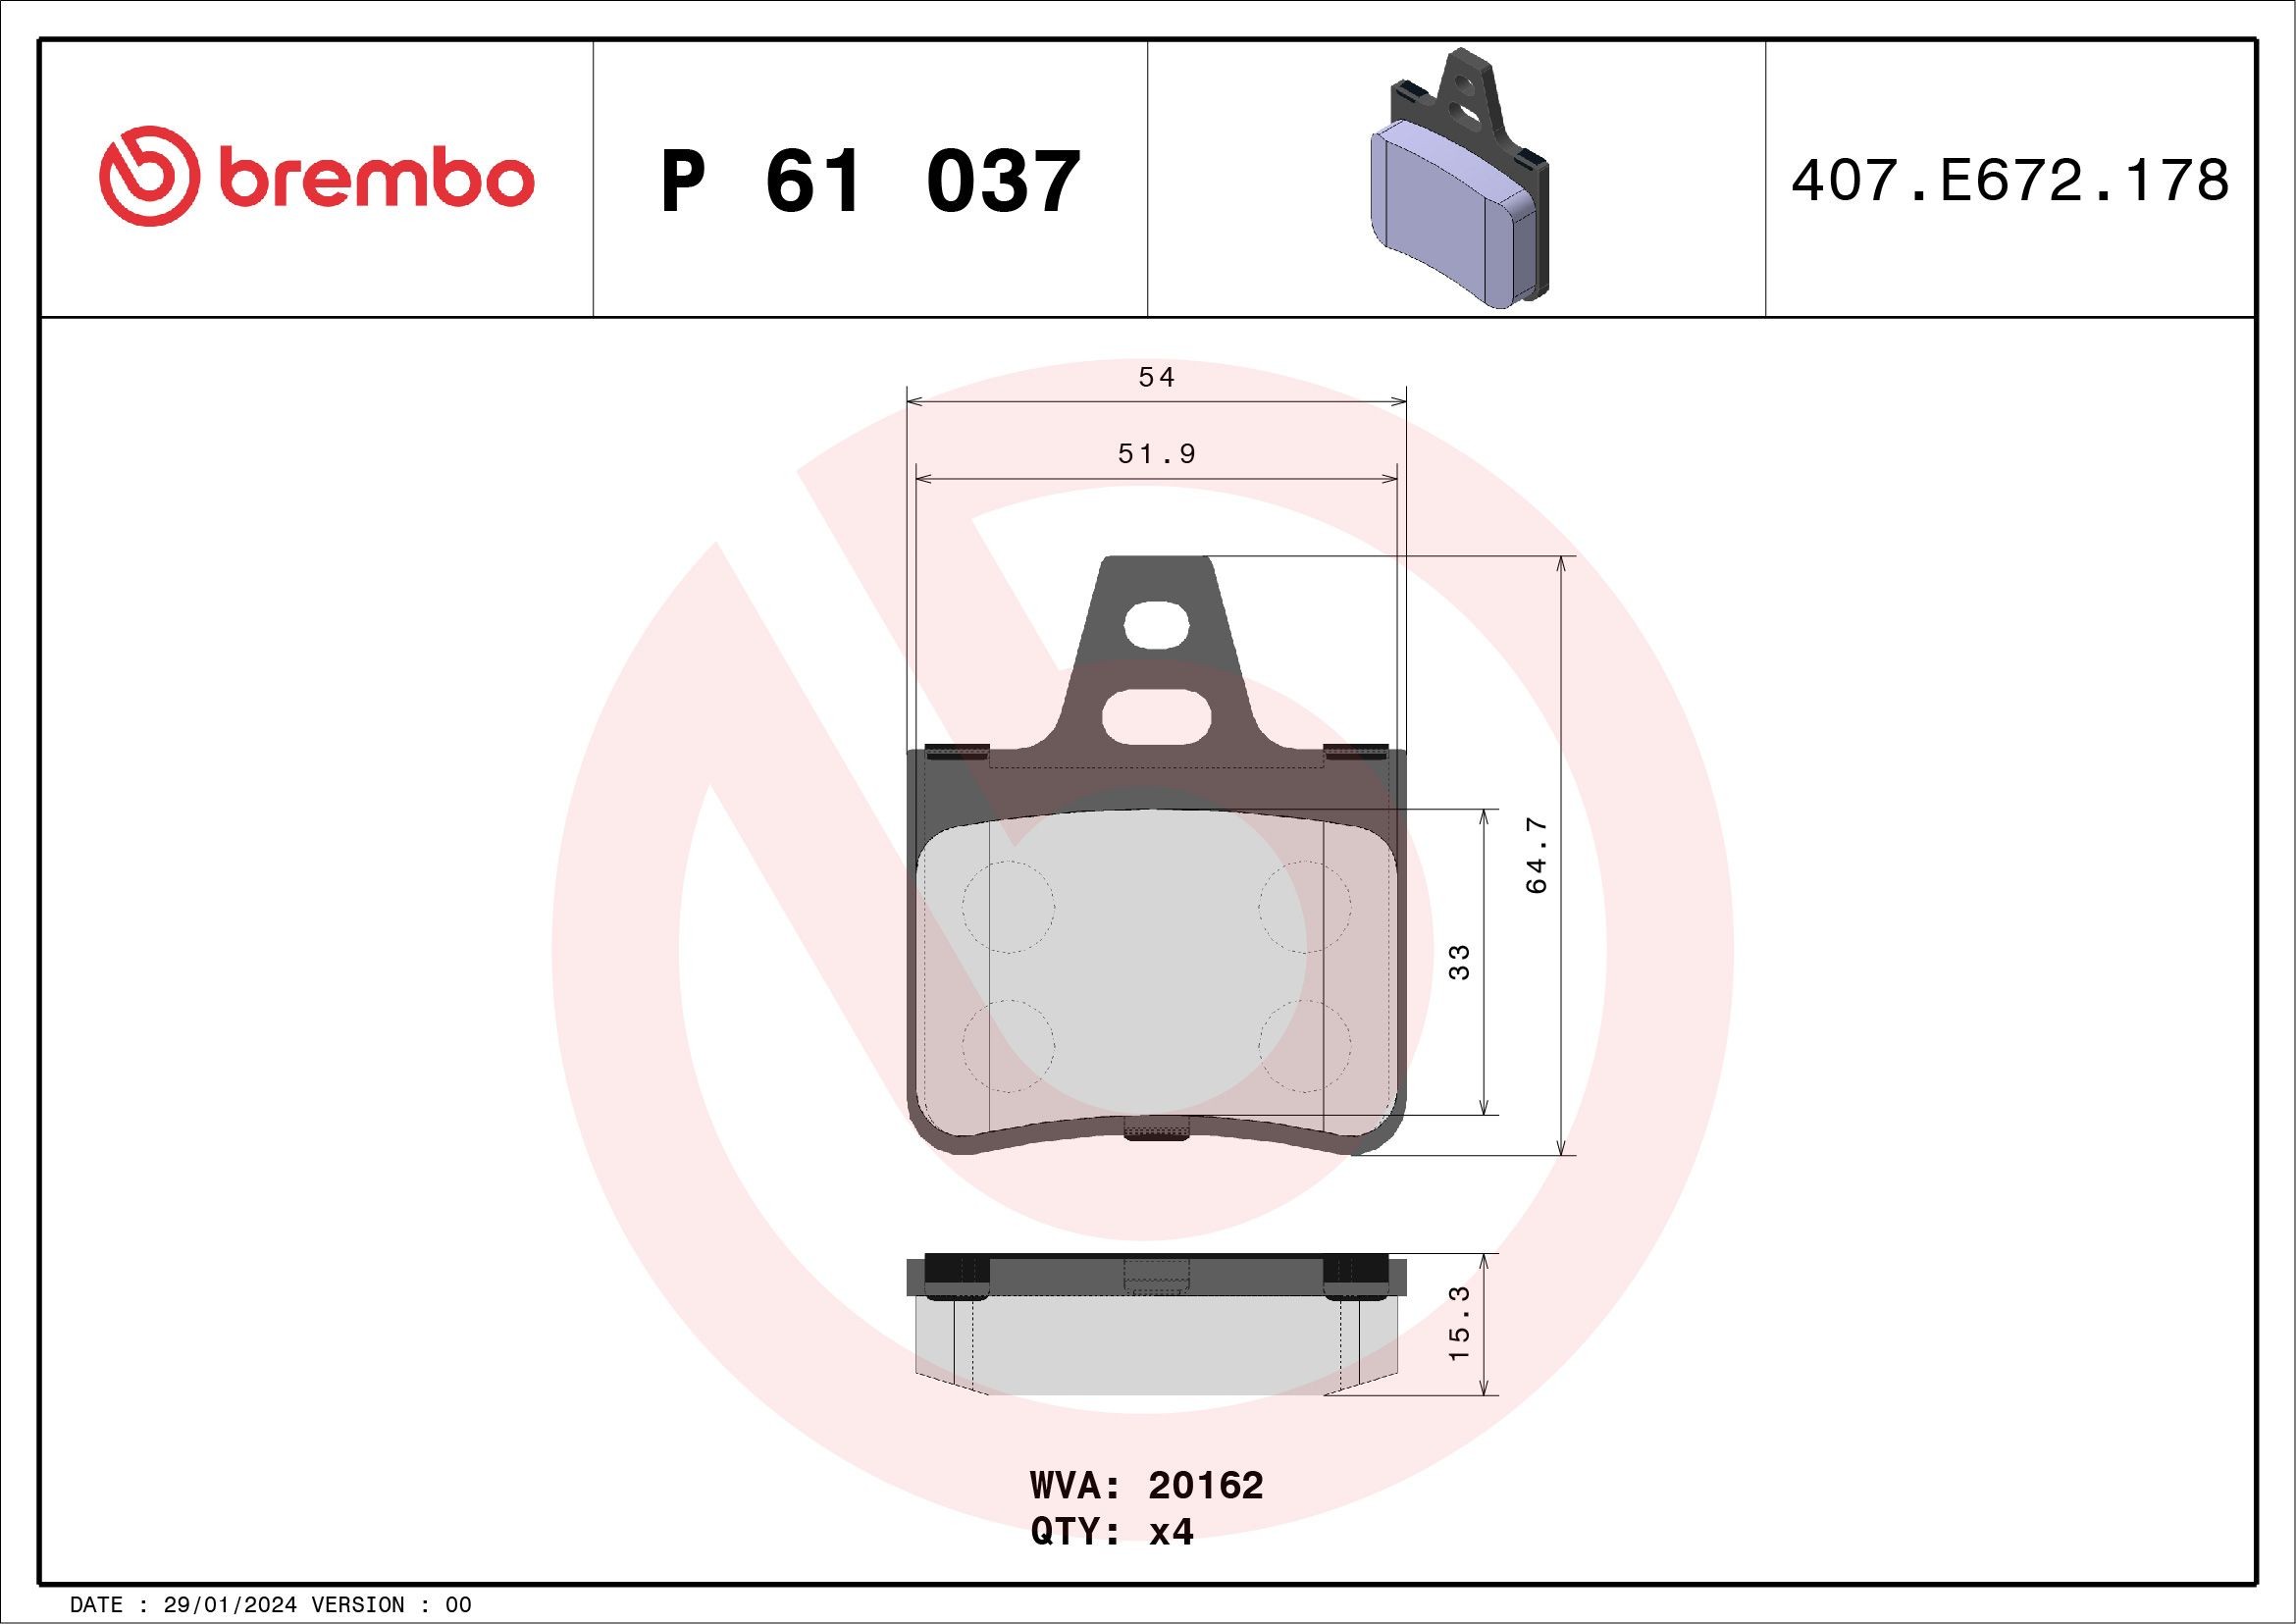 BREMBO P 61 037 Brake pad set excl. wear warning contact, without accessories